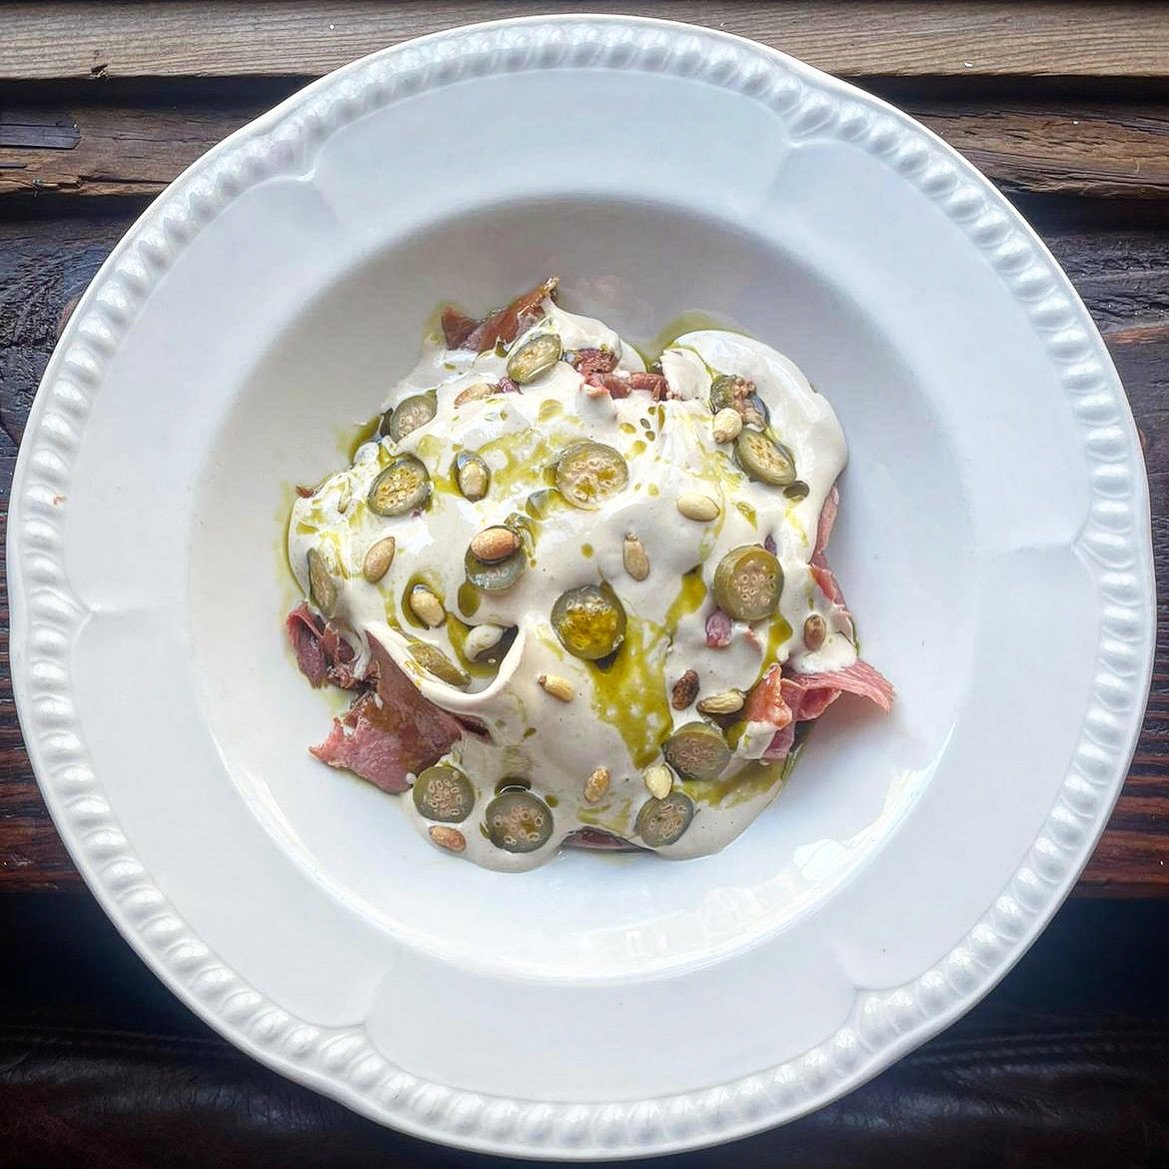 Ox tongue in tonnato sauce, caper berries, parsley oil, pine nuts